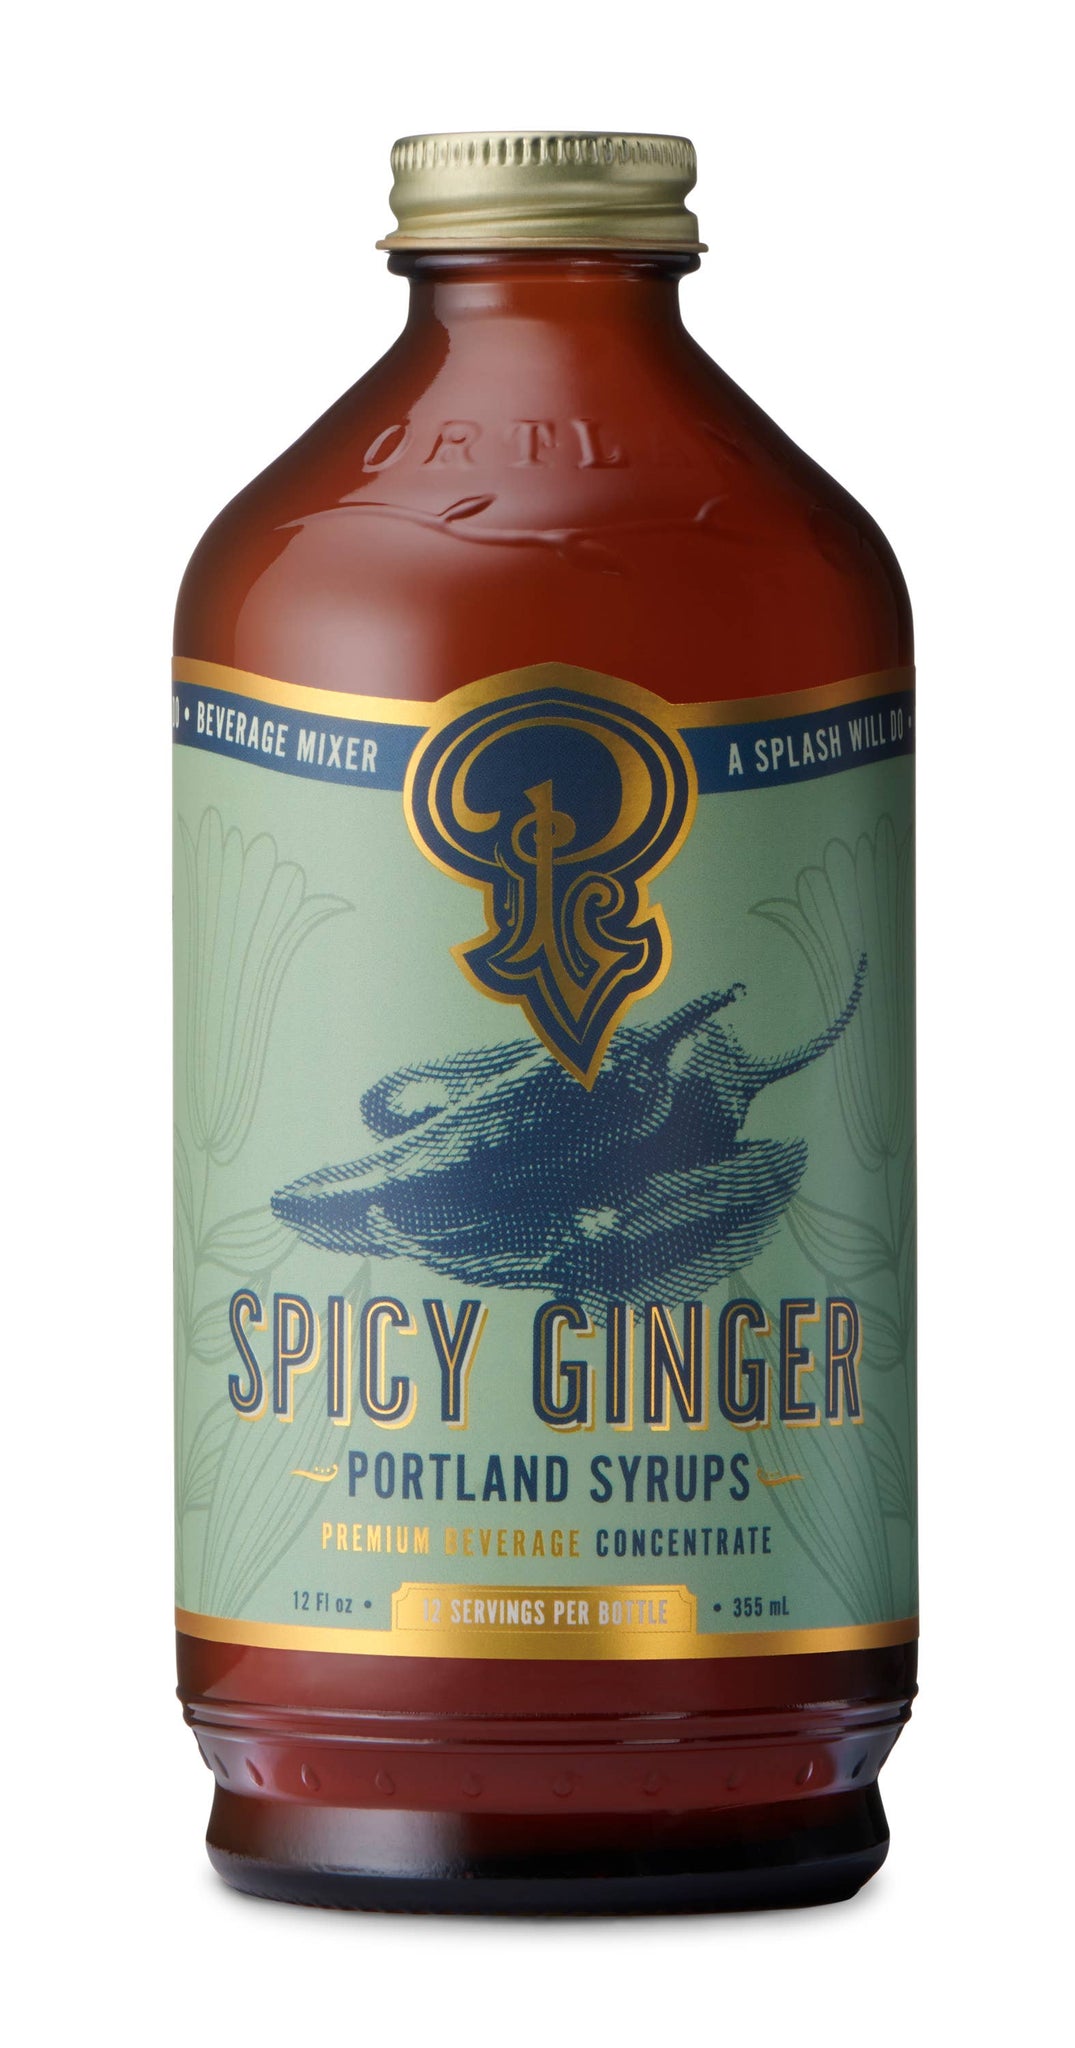 Portland Syrups Spicy Ginger Syrup